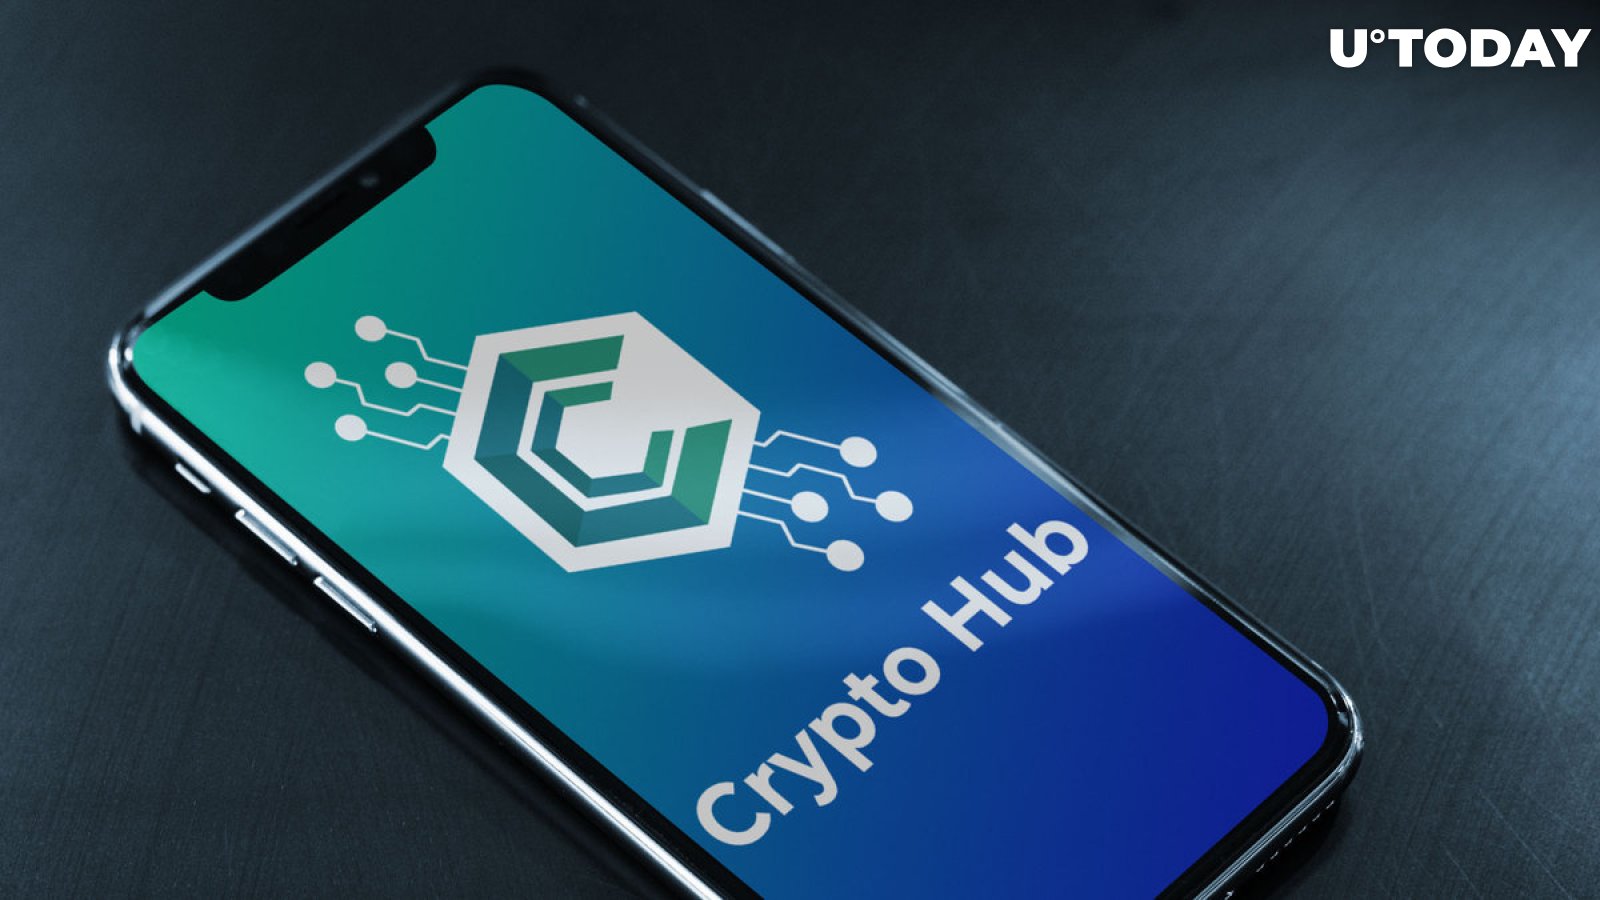 Crypto Hub Launches Android App for Cryptocurrencies Tracking, Broadcasts U.Today Newsfeed